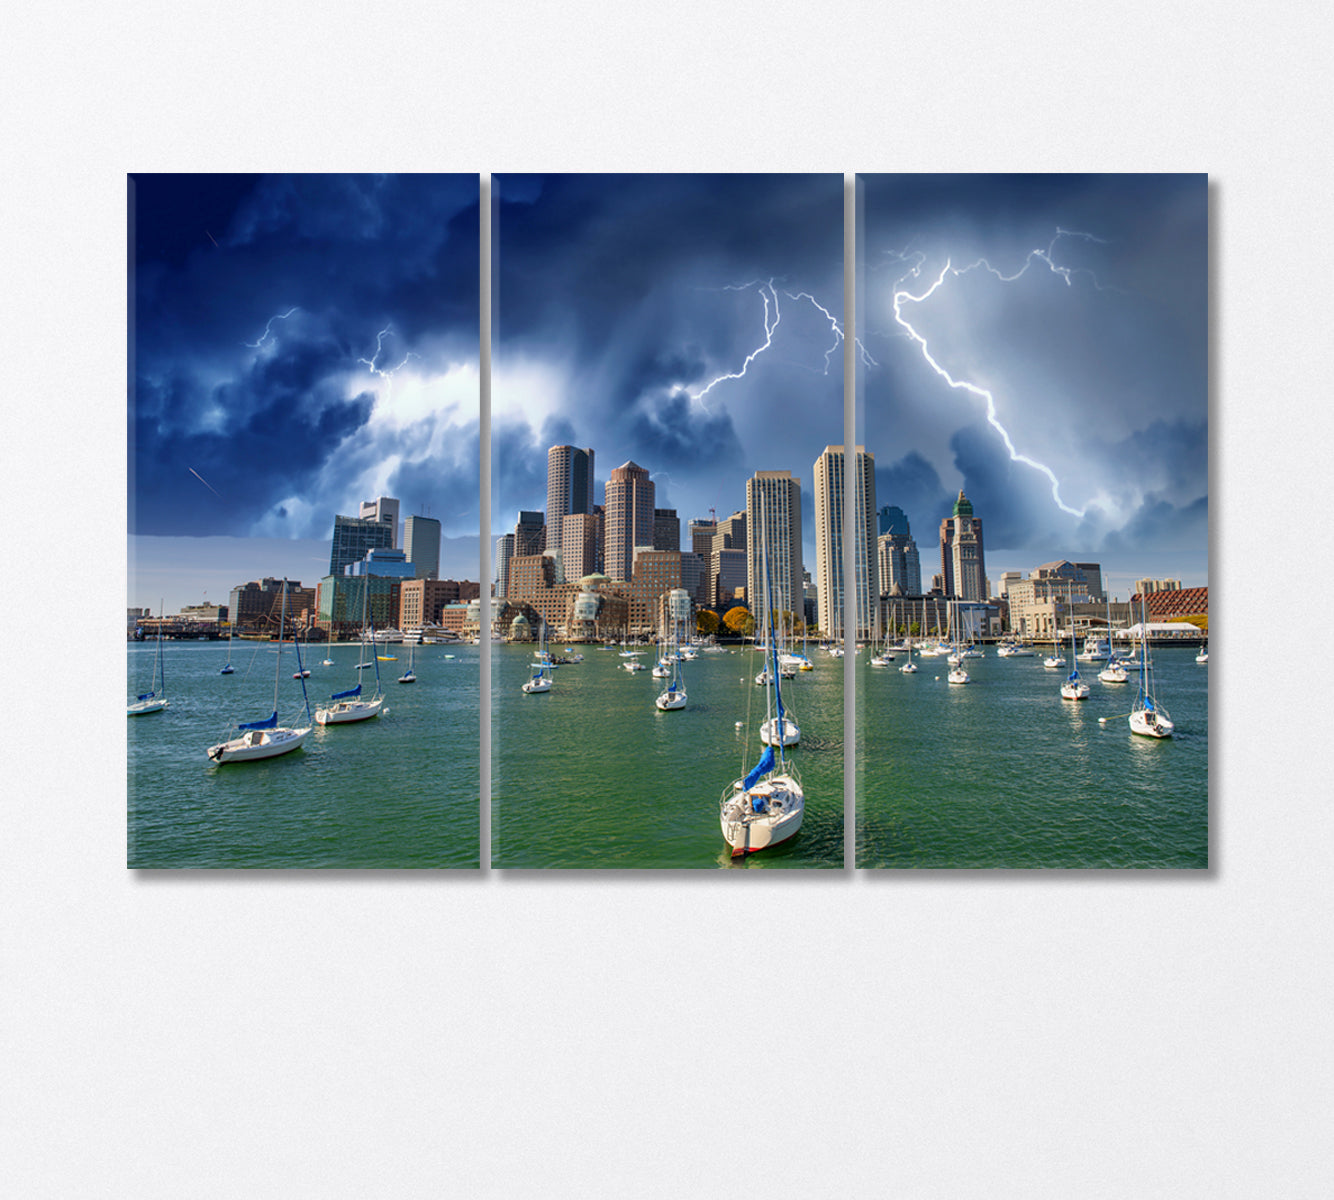 Boston Skyline and Boats Under an Impending Storm Canvas Print-Canvas Print-CetArt-3 Panels-36x24 inches-CetArt